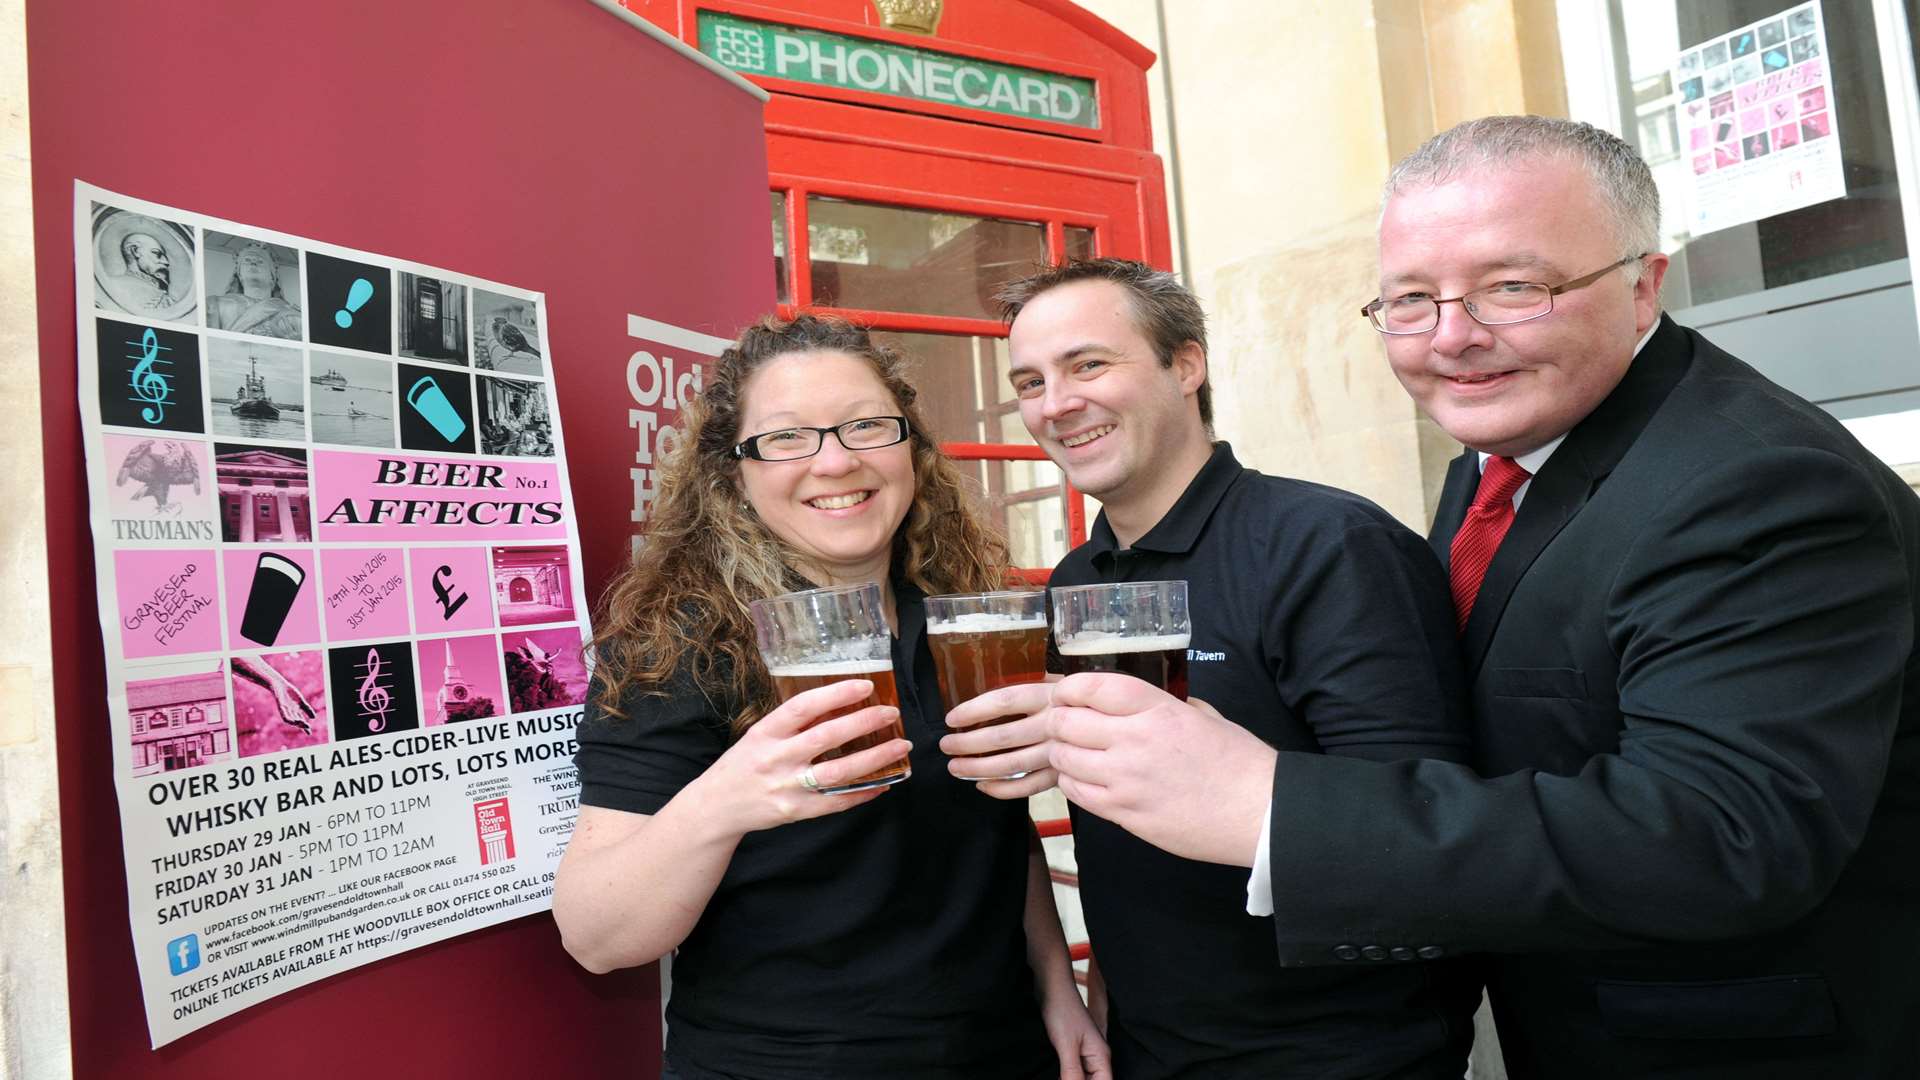 Natalie Wells and Paul Bridges from the Windmill Tavern, who will be running the bar, with Steve Thompson